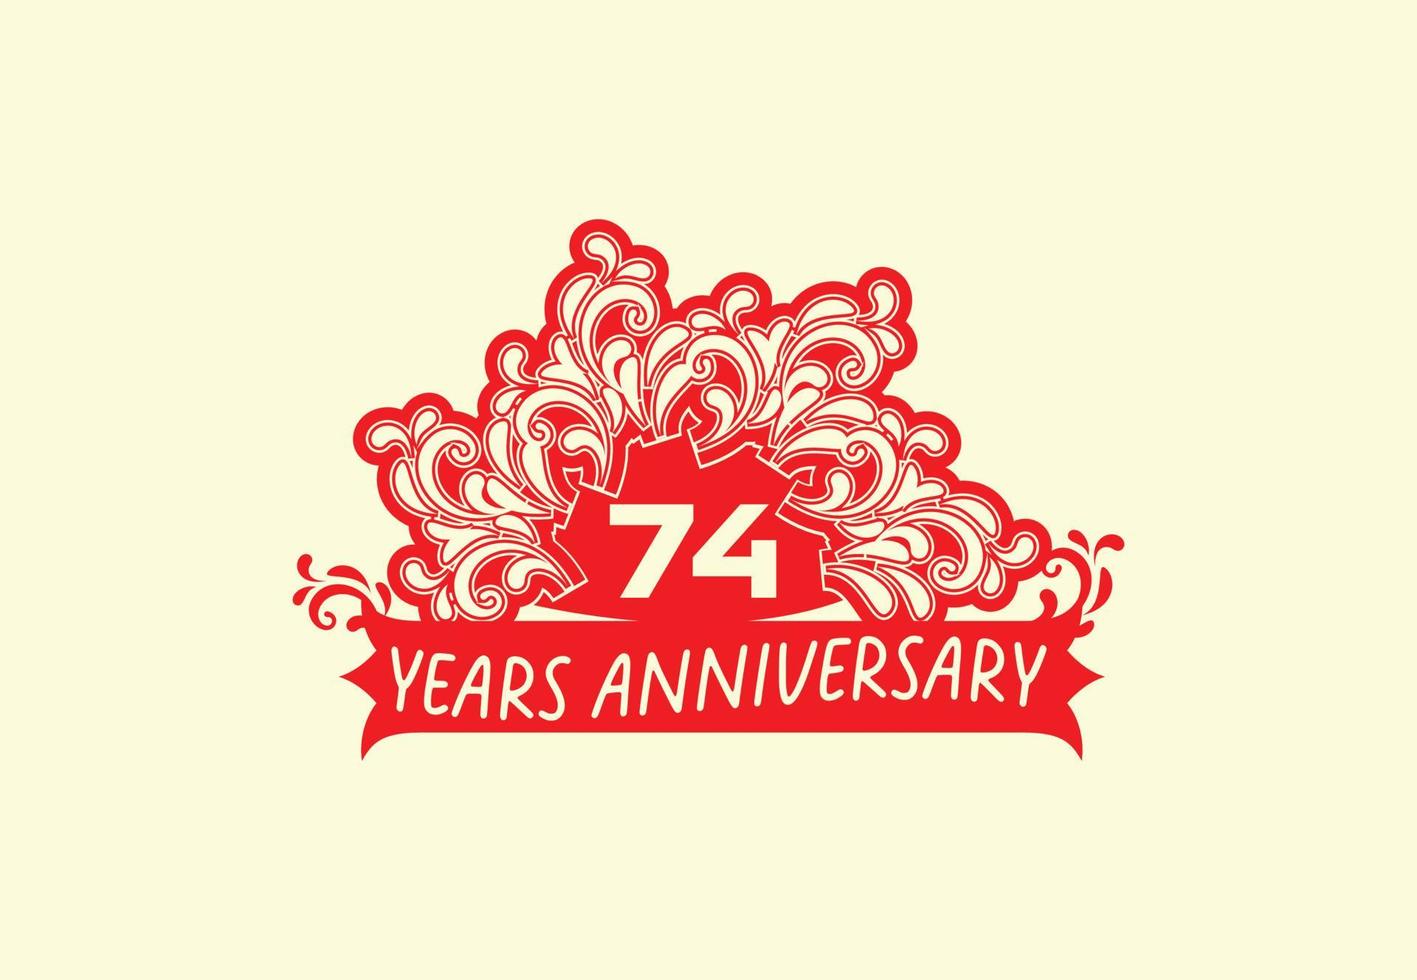 74 years anniversary logo and sticker design template vector